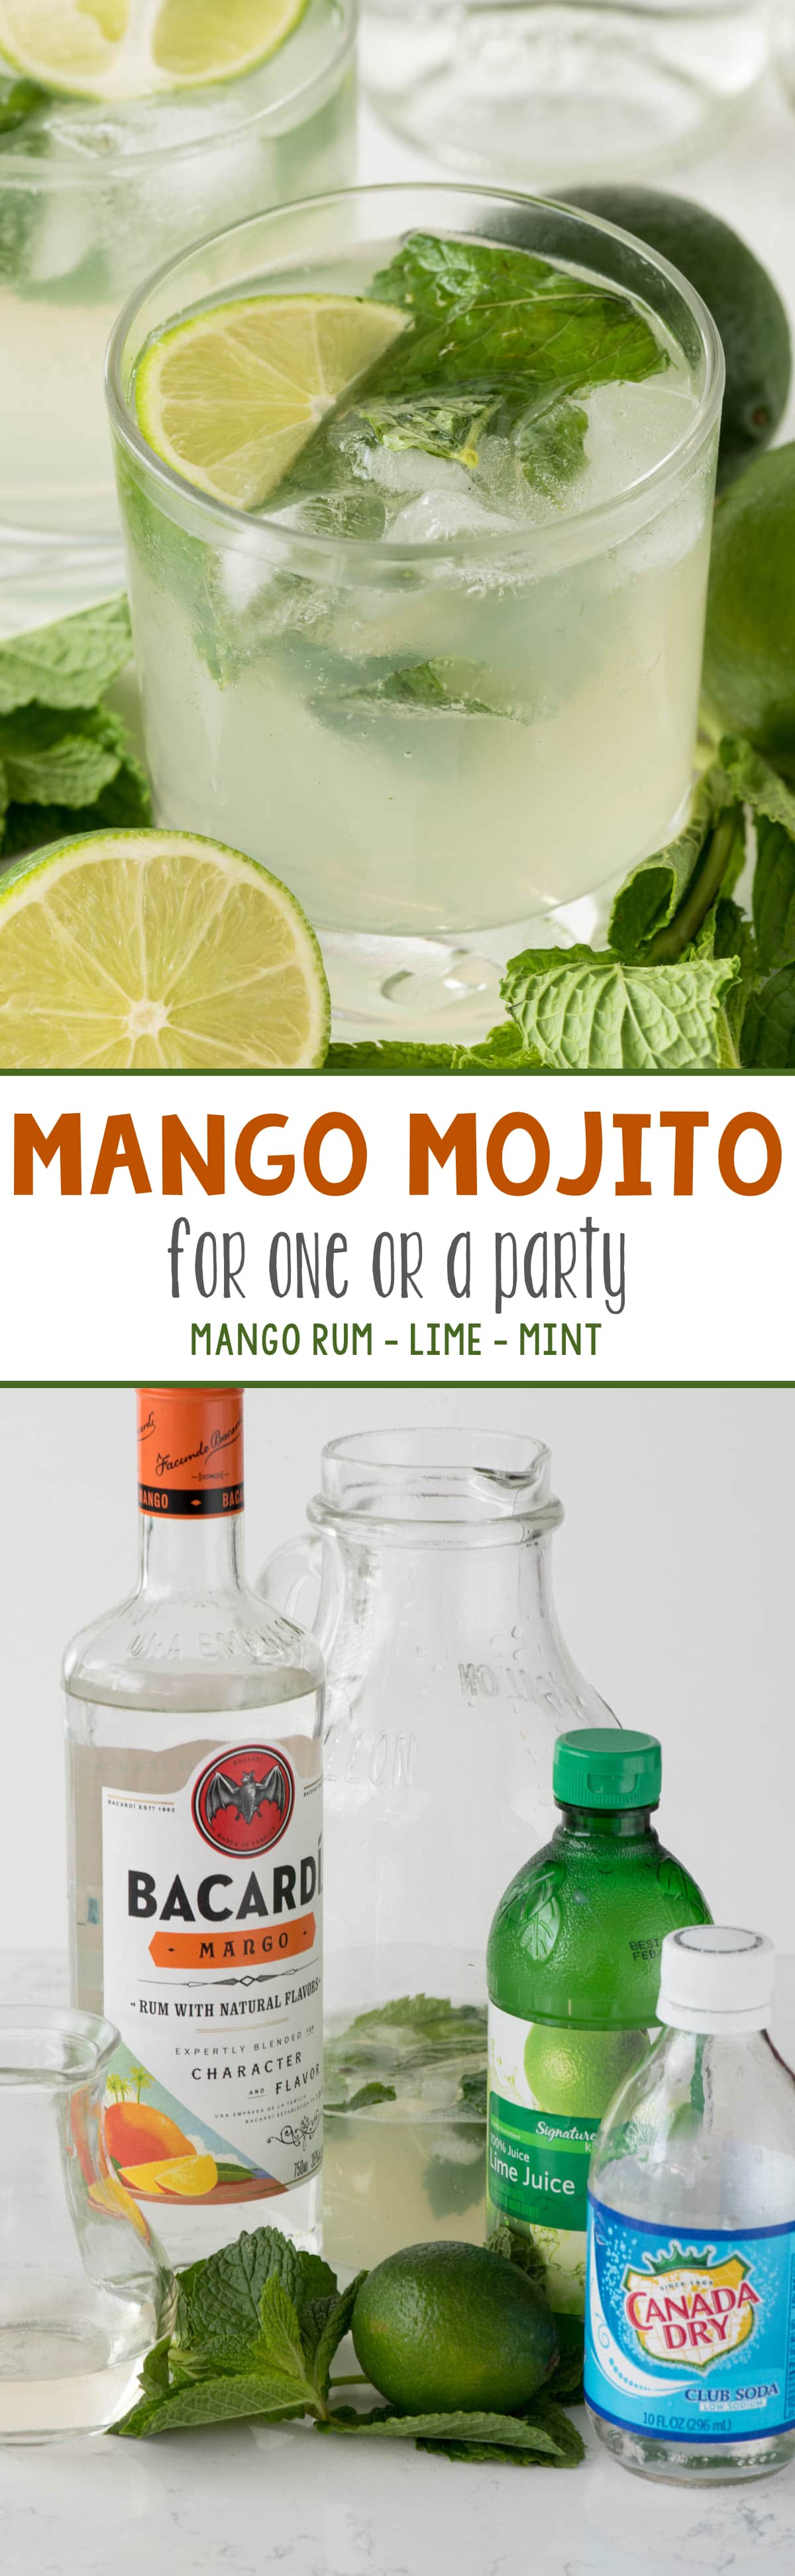 Mango Mojito - this easy cocktail recipe is like drinking a mojito at the beach! Infused with mango flavor, it's a simple drink for one or it makes a pitcher!